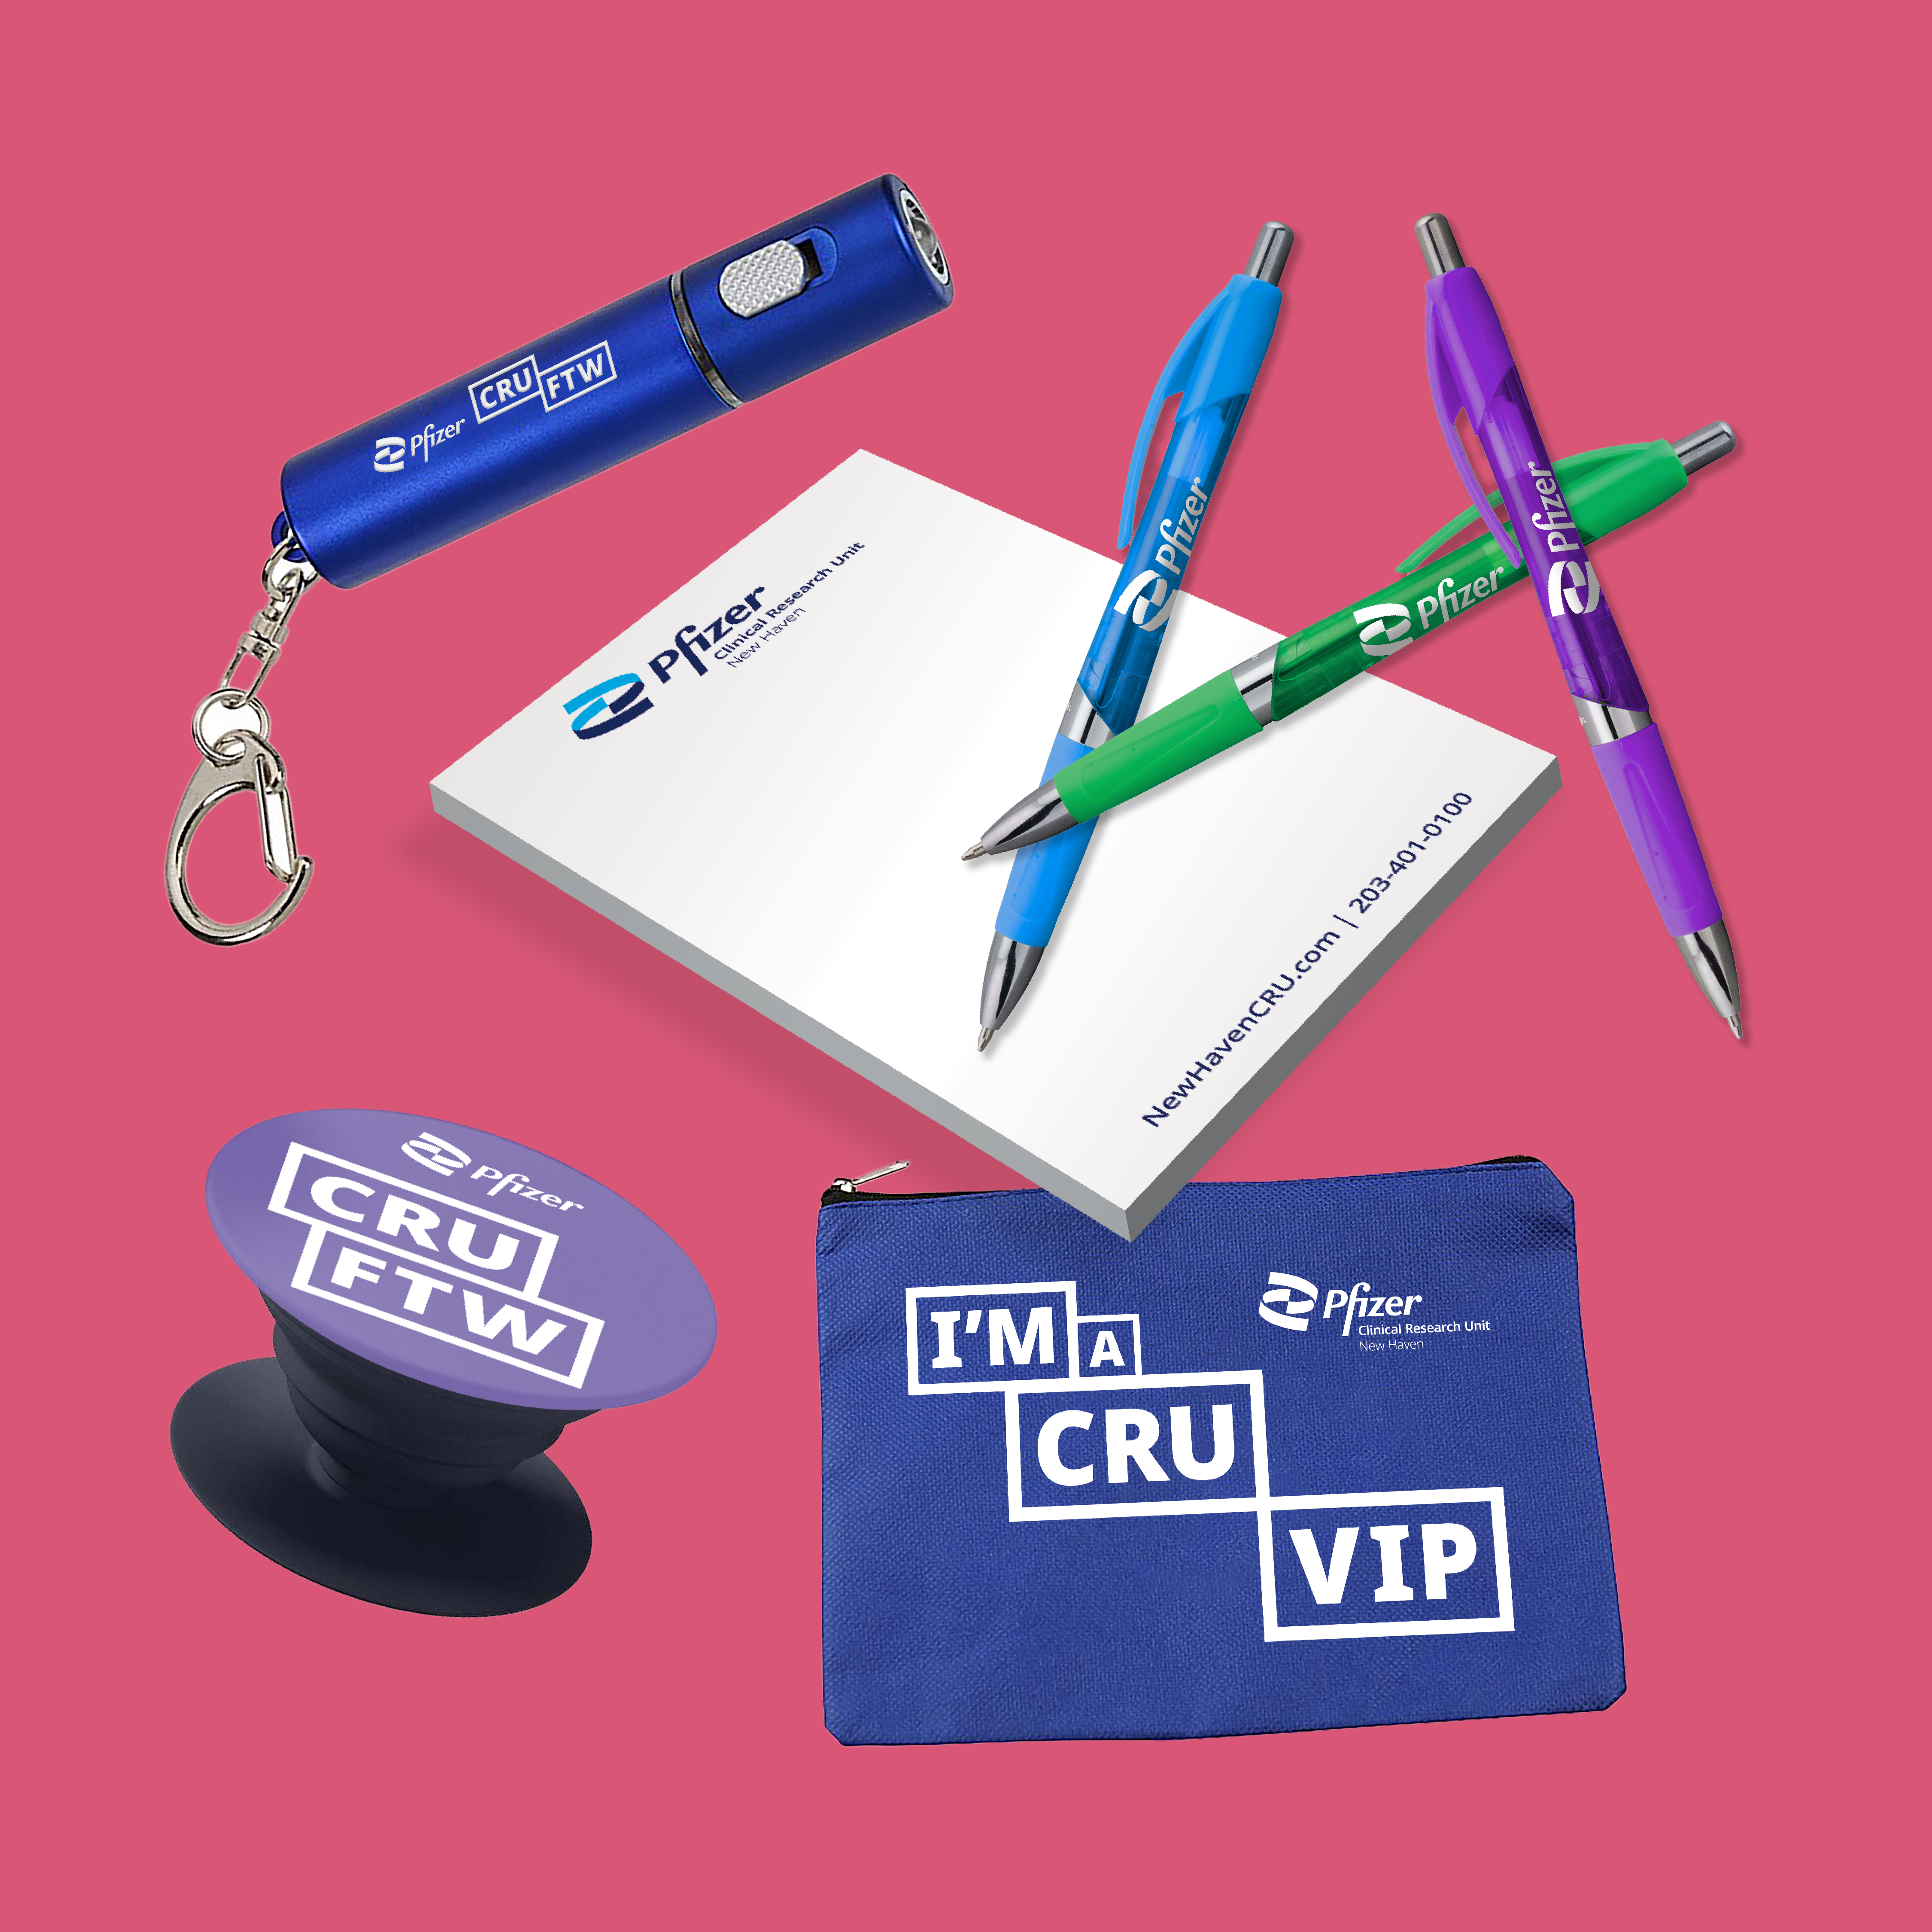 : A collection of colorful promotional PCRU-branded items such as colored pens, note pads, and keychain flashlights on a bright pink background.